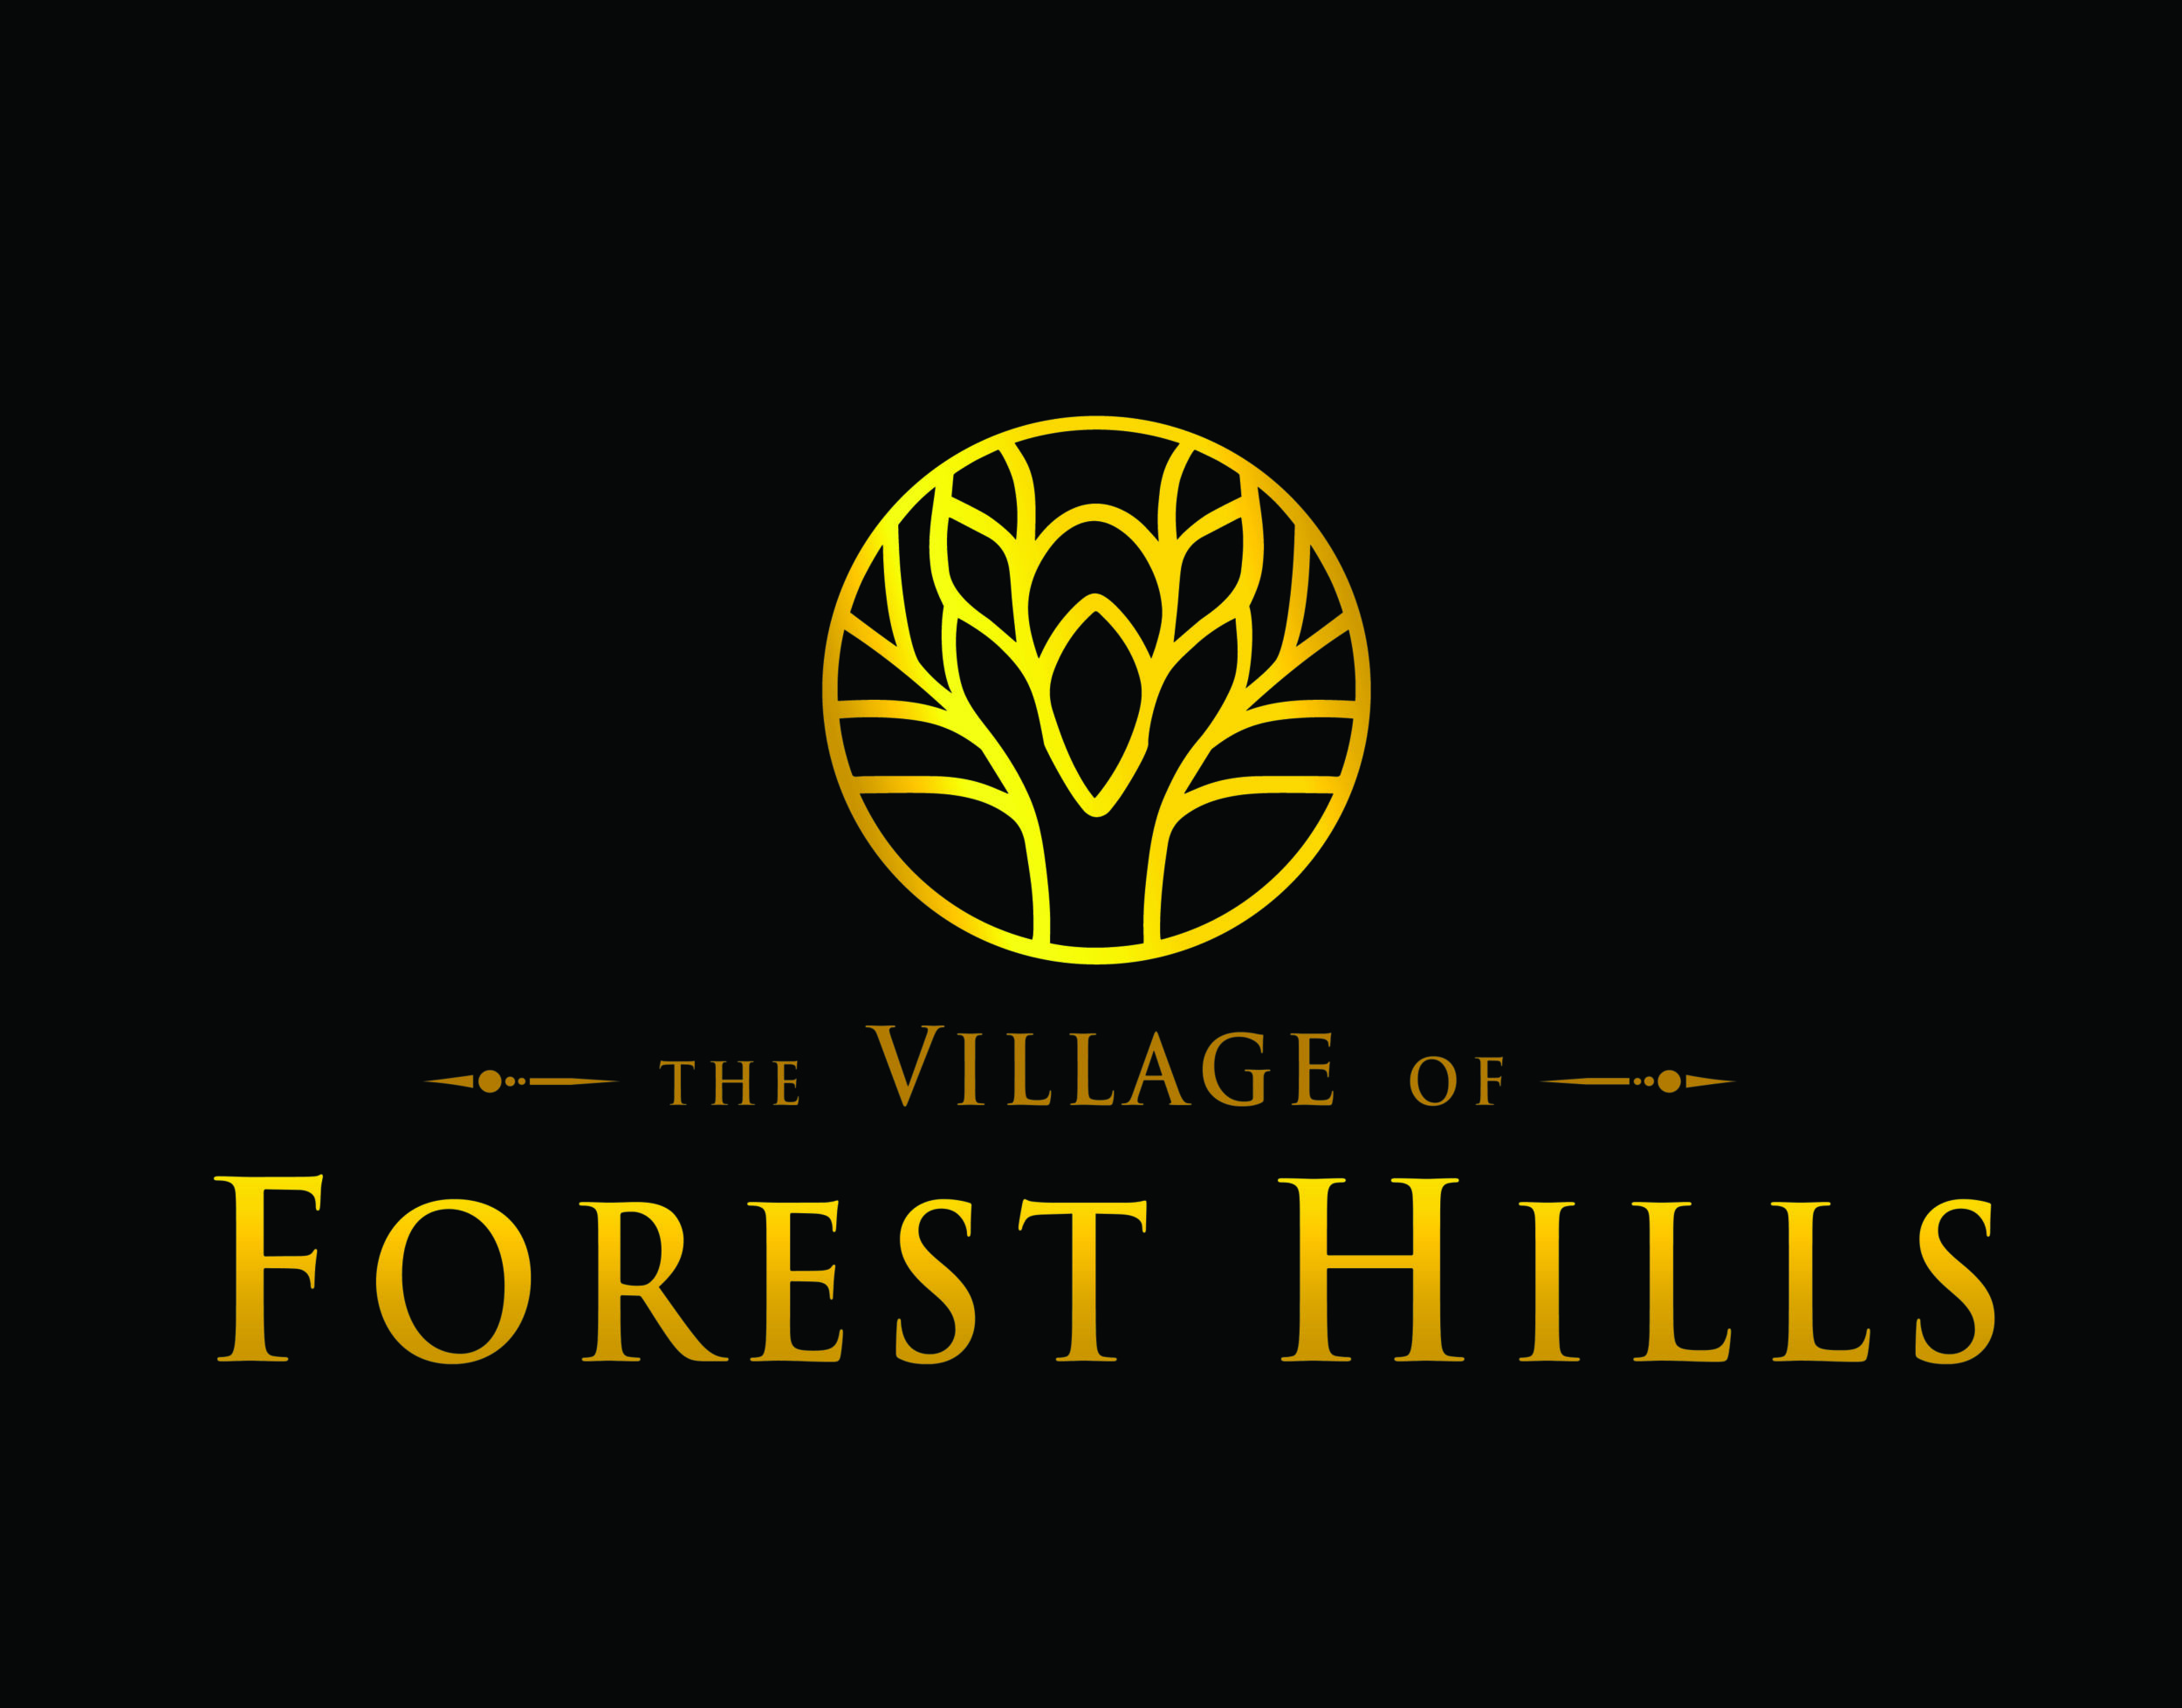 The Village of Forest Hills